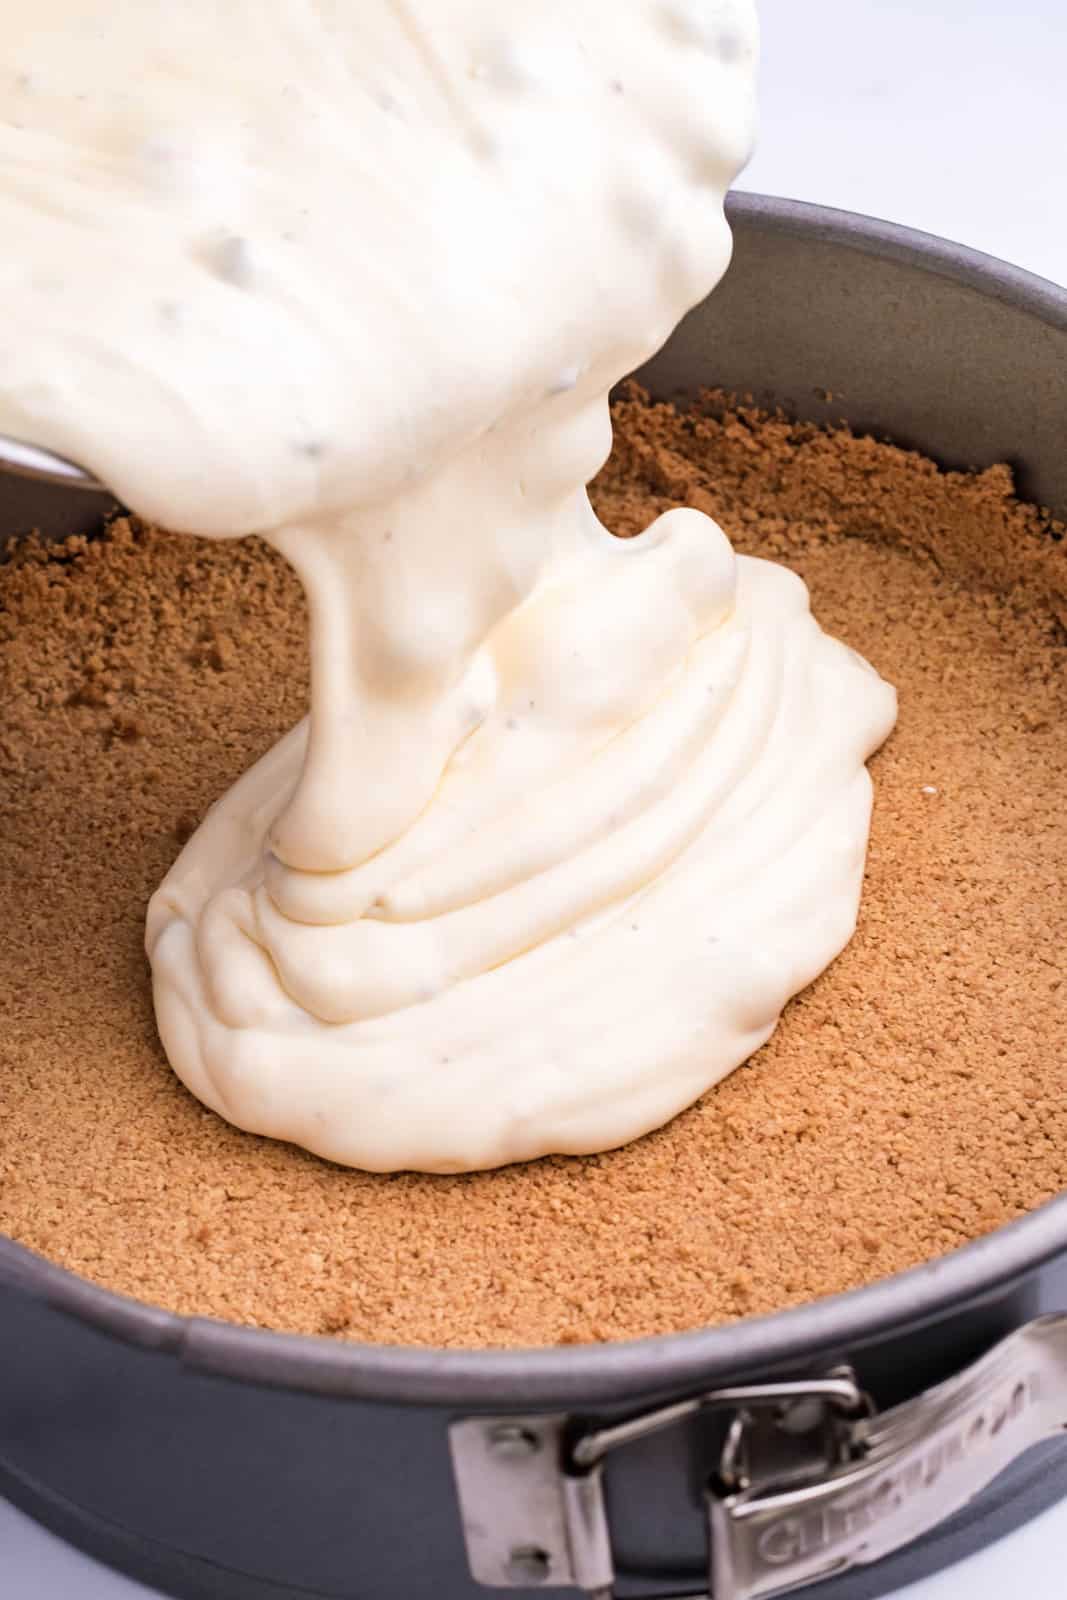 Cheesecake filling being poured into a graham cracker crumb crust in a pan.